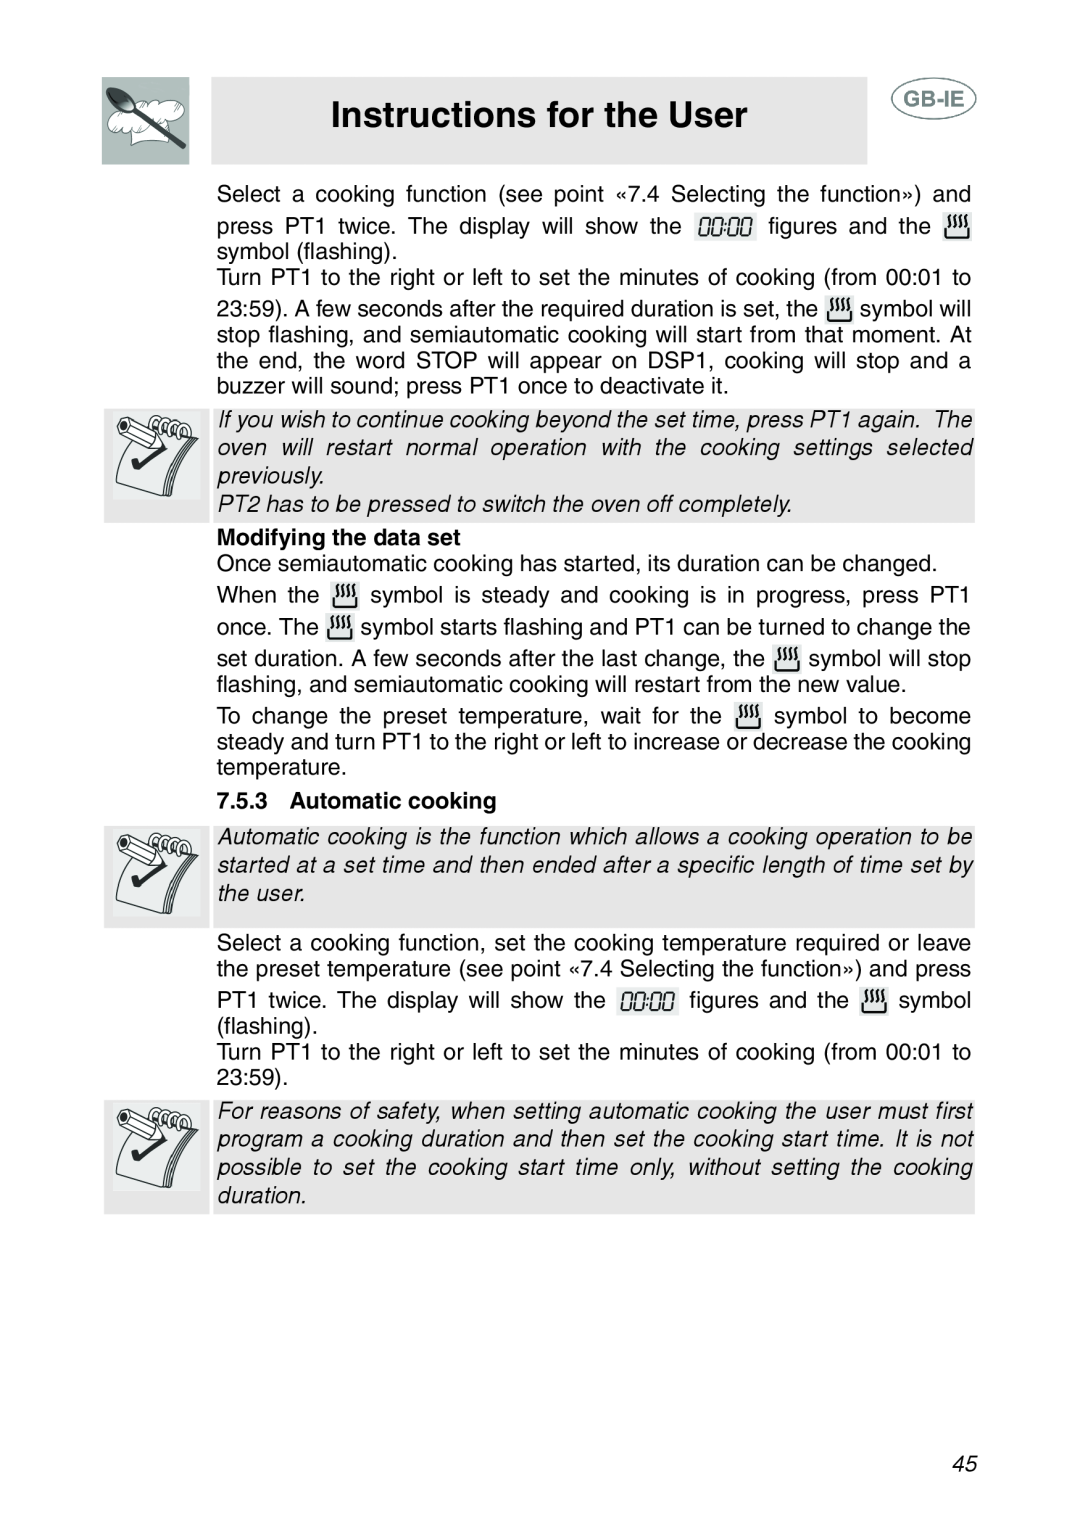 Smeg XXSC111P manual Automatic cooking, Instructions for the User, PT2 has to be pressed to switch the oven off completely 